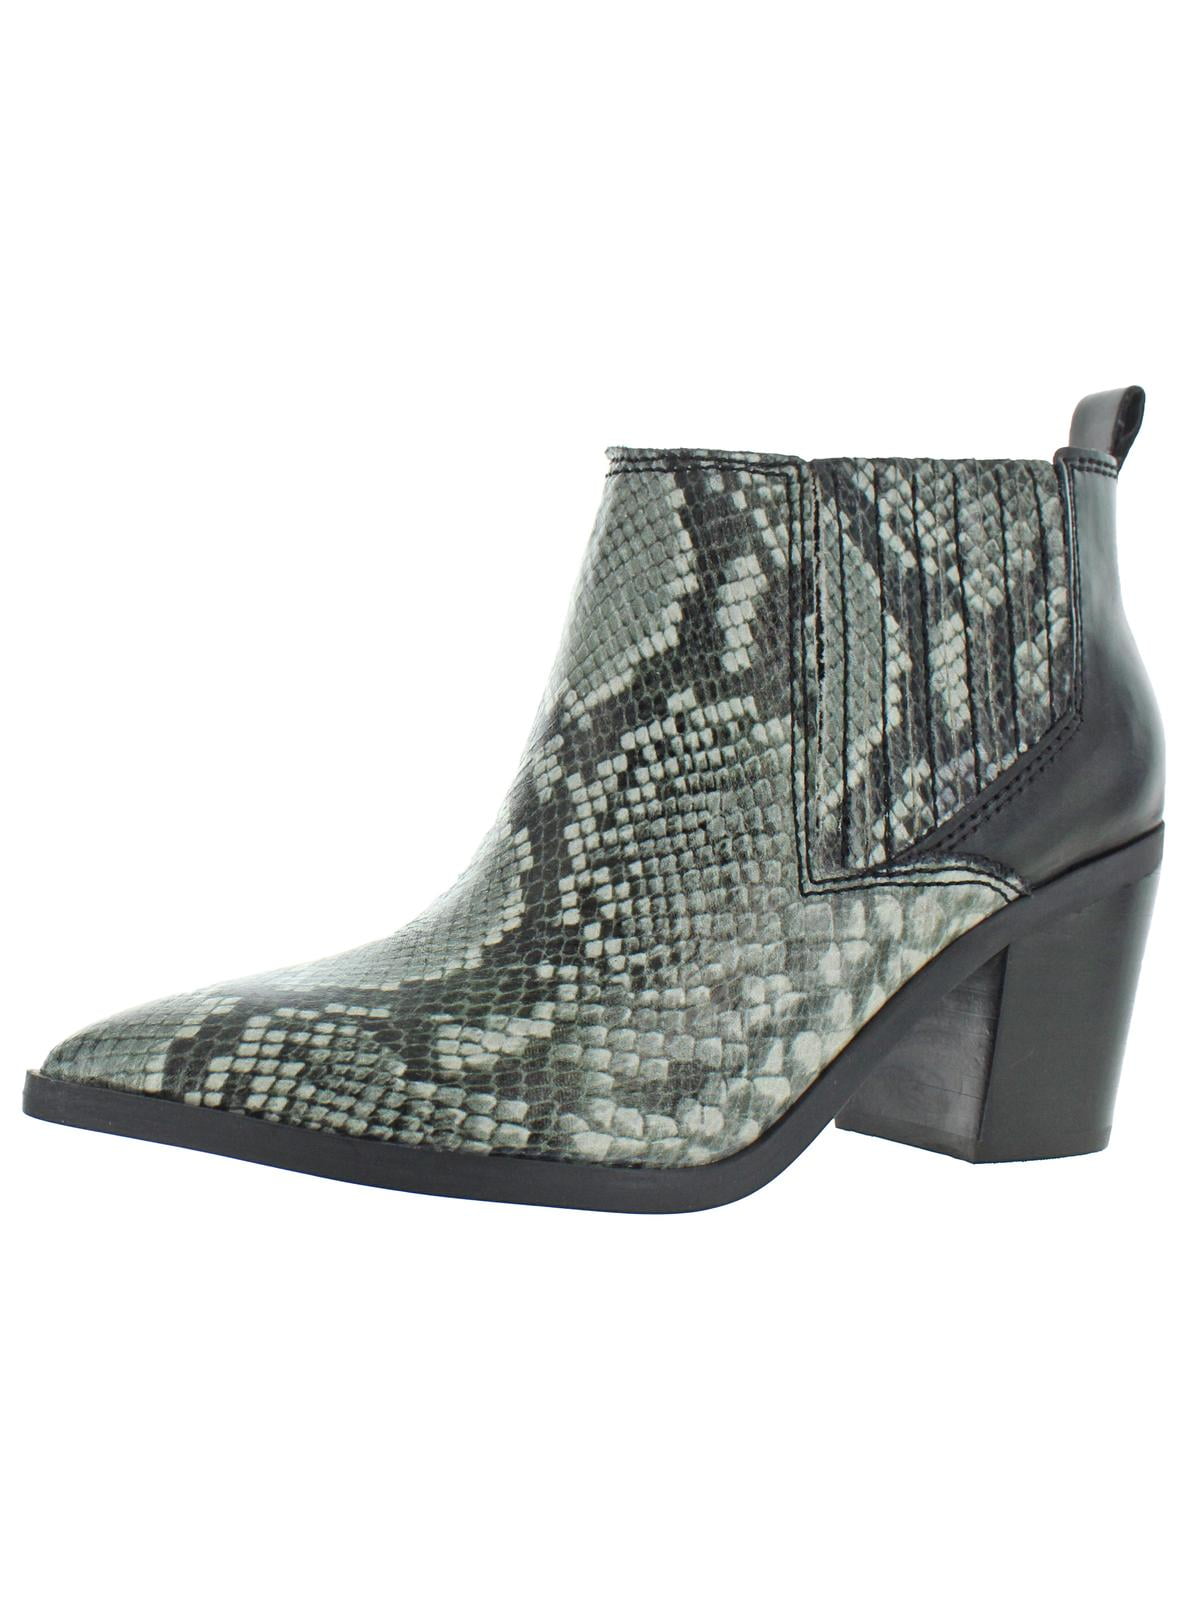 leather snake print boots